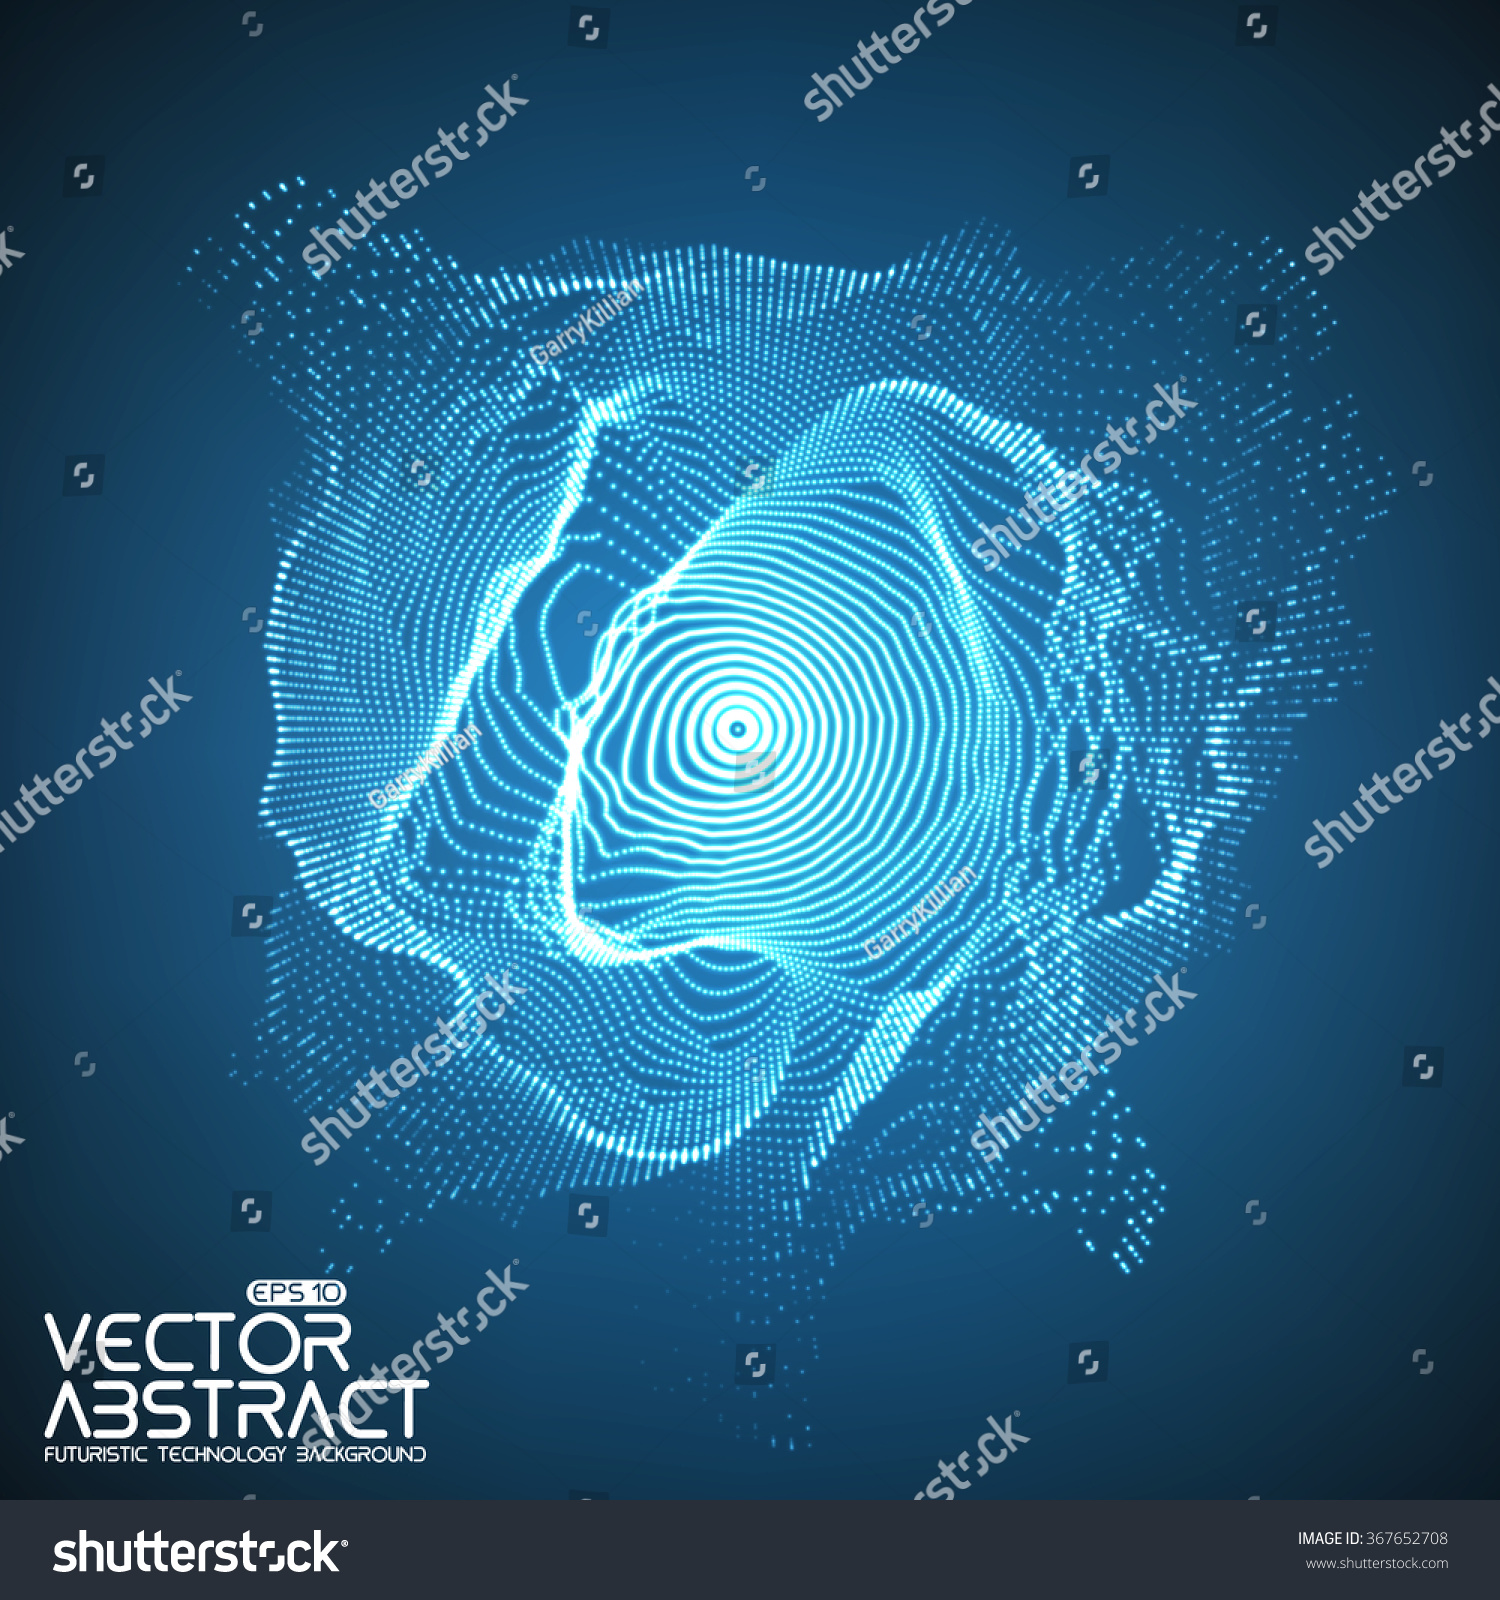 Abstract vector mesh on blue background. Futuristic style card. Elegant background for business presentations.  Corrupted point sphere.  Chaos aesthetics. #367652708